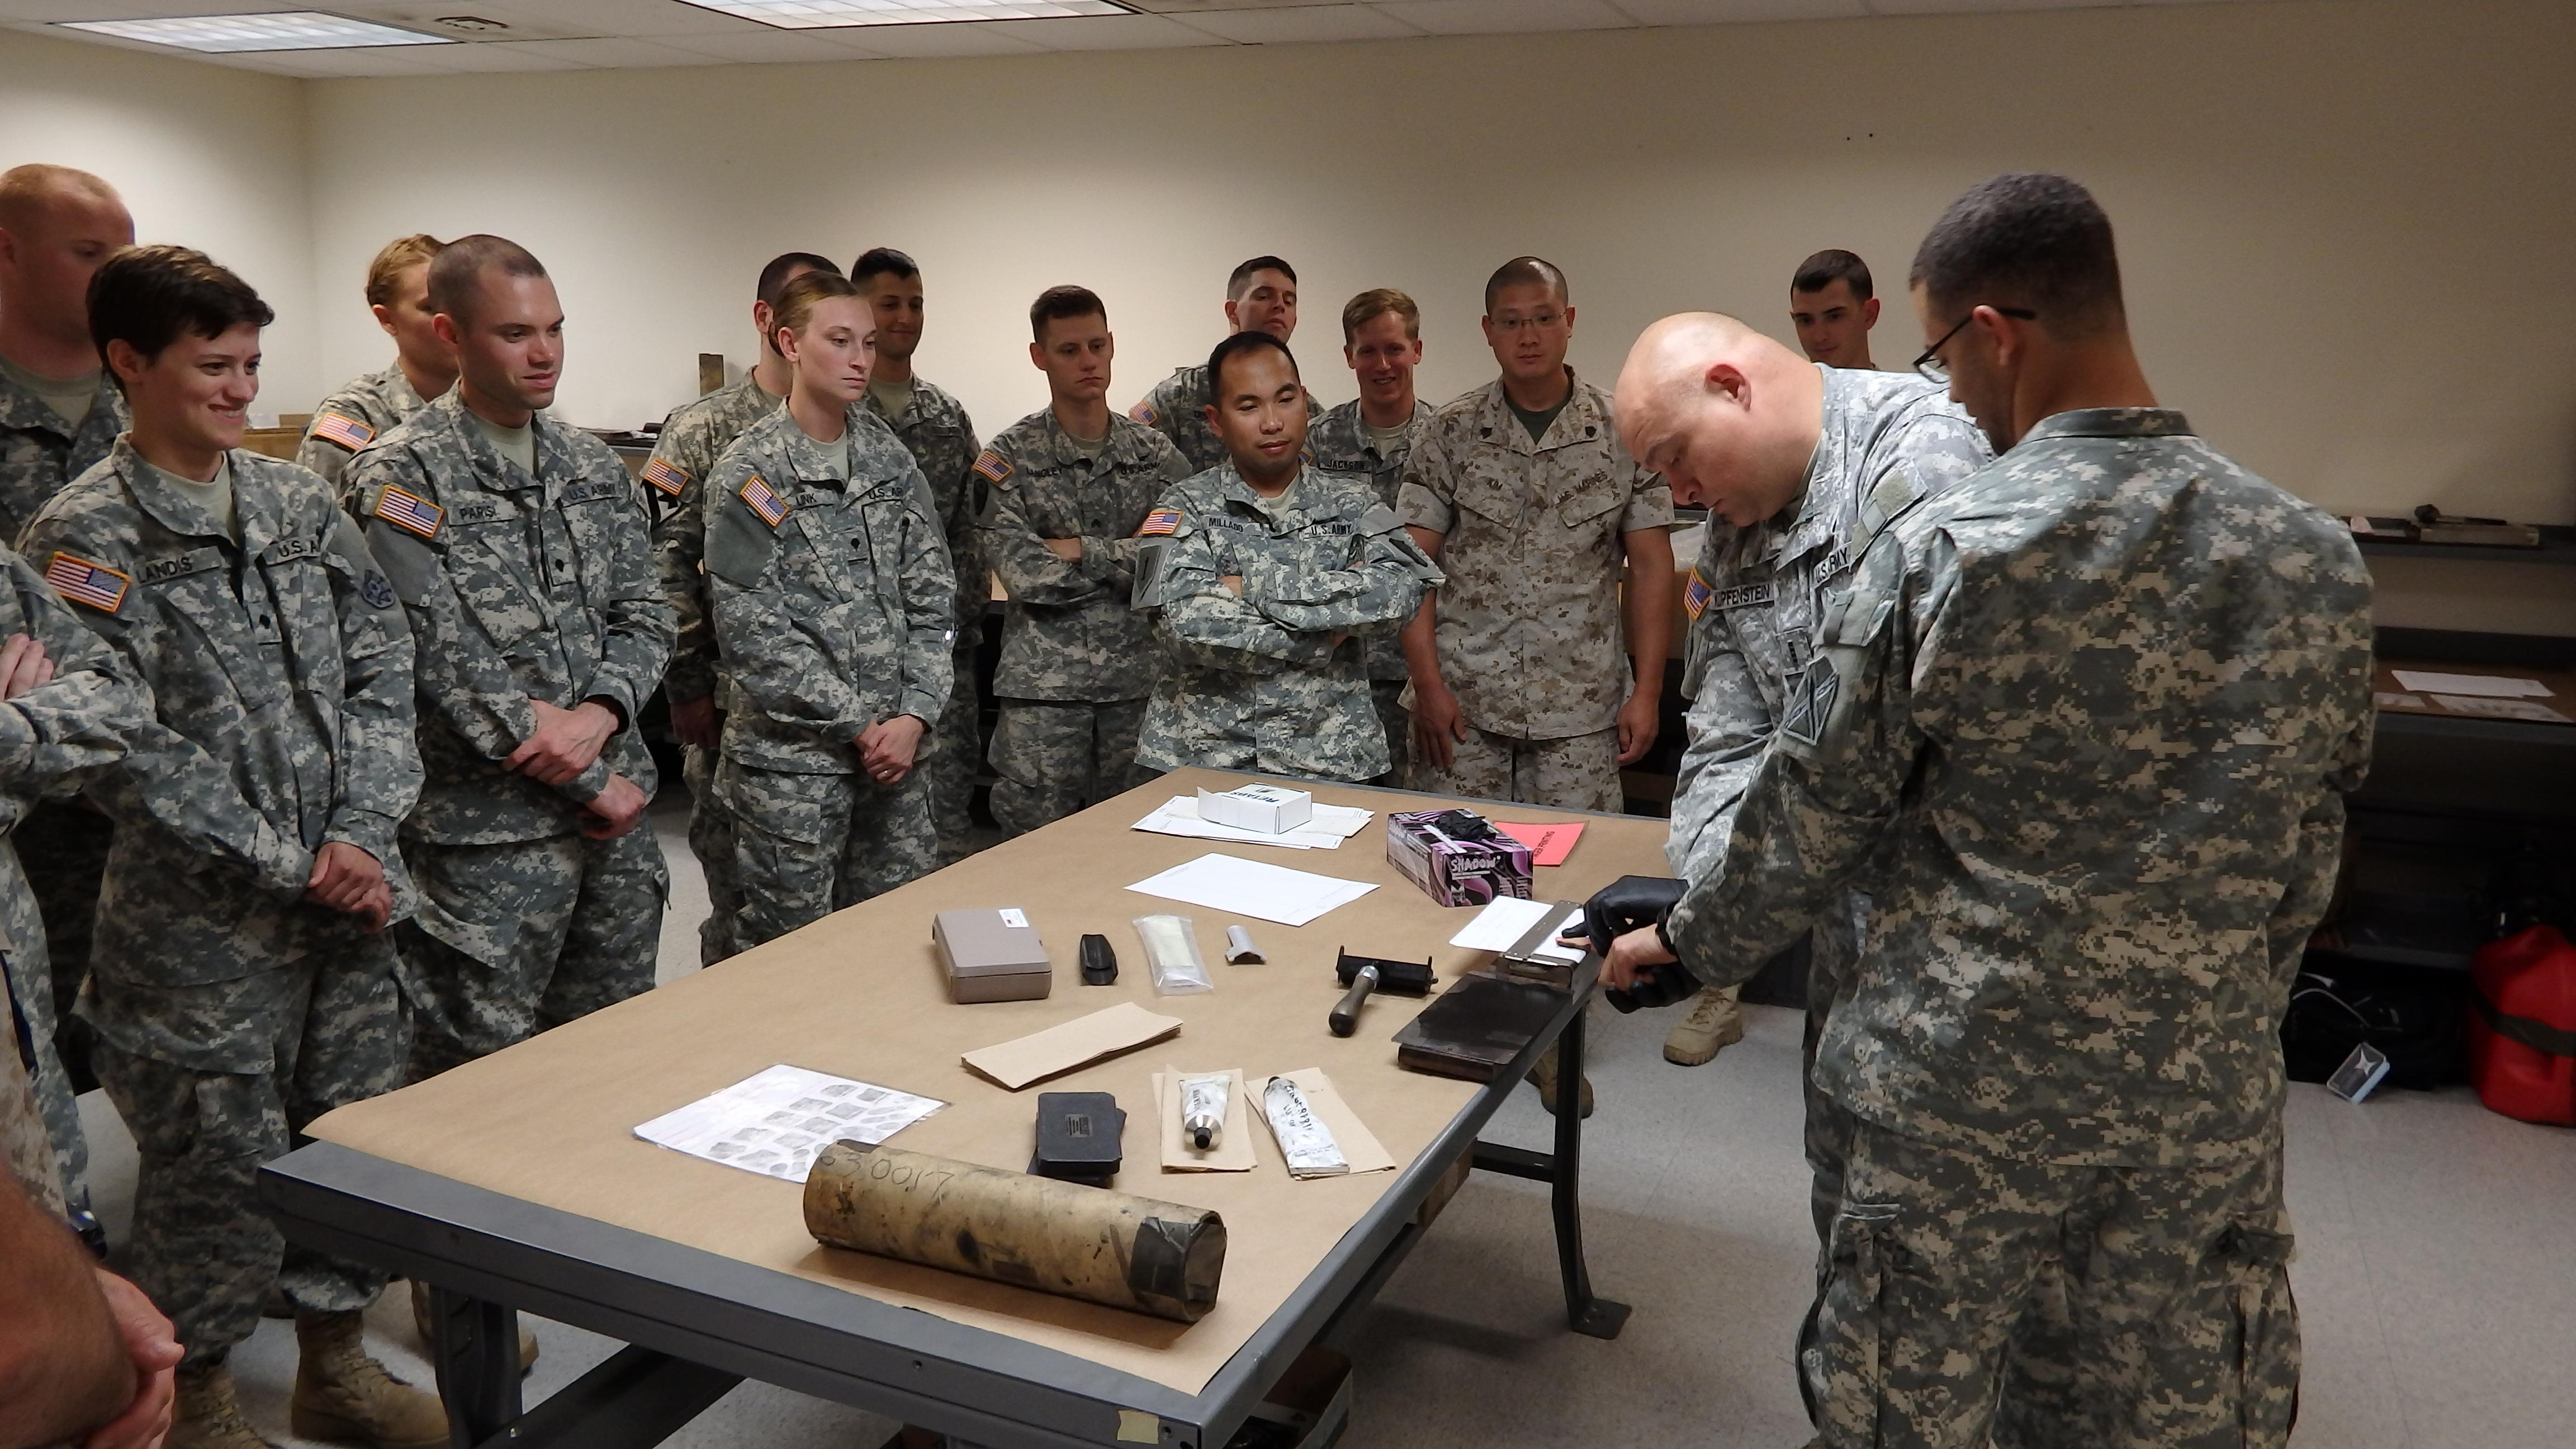 Special agents get their start on Fort Leonard Wood | Article | The ...